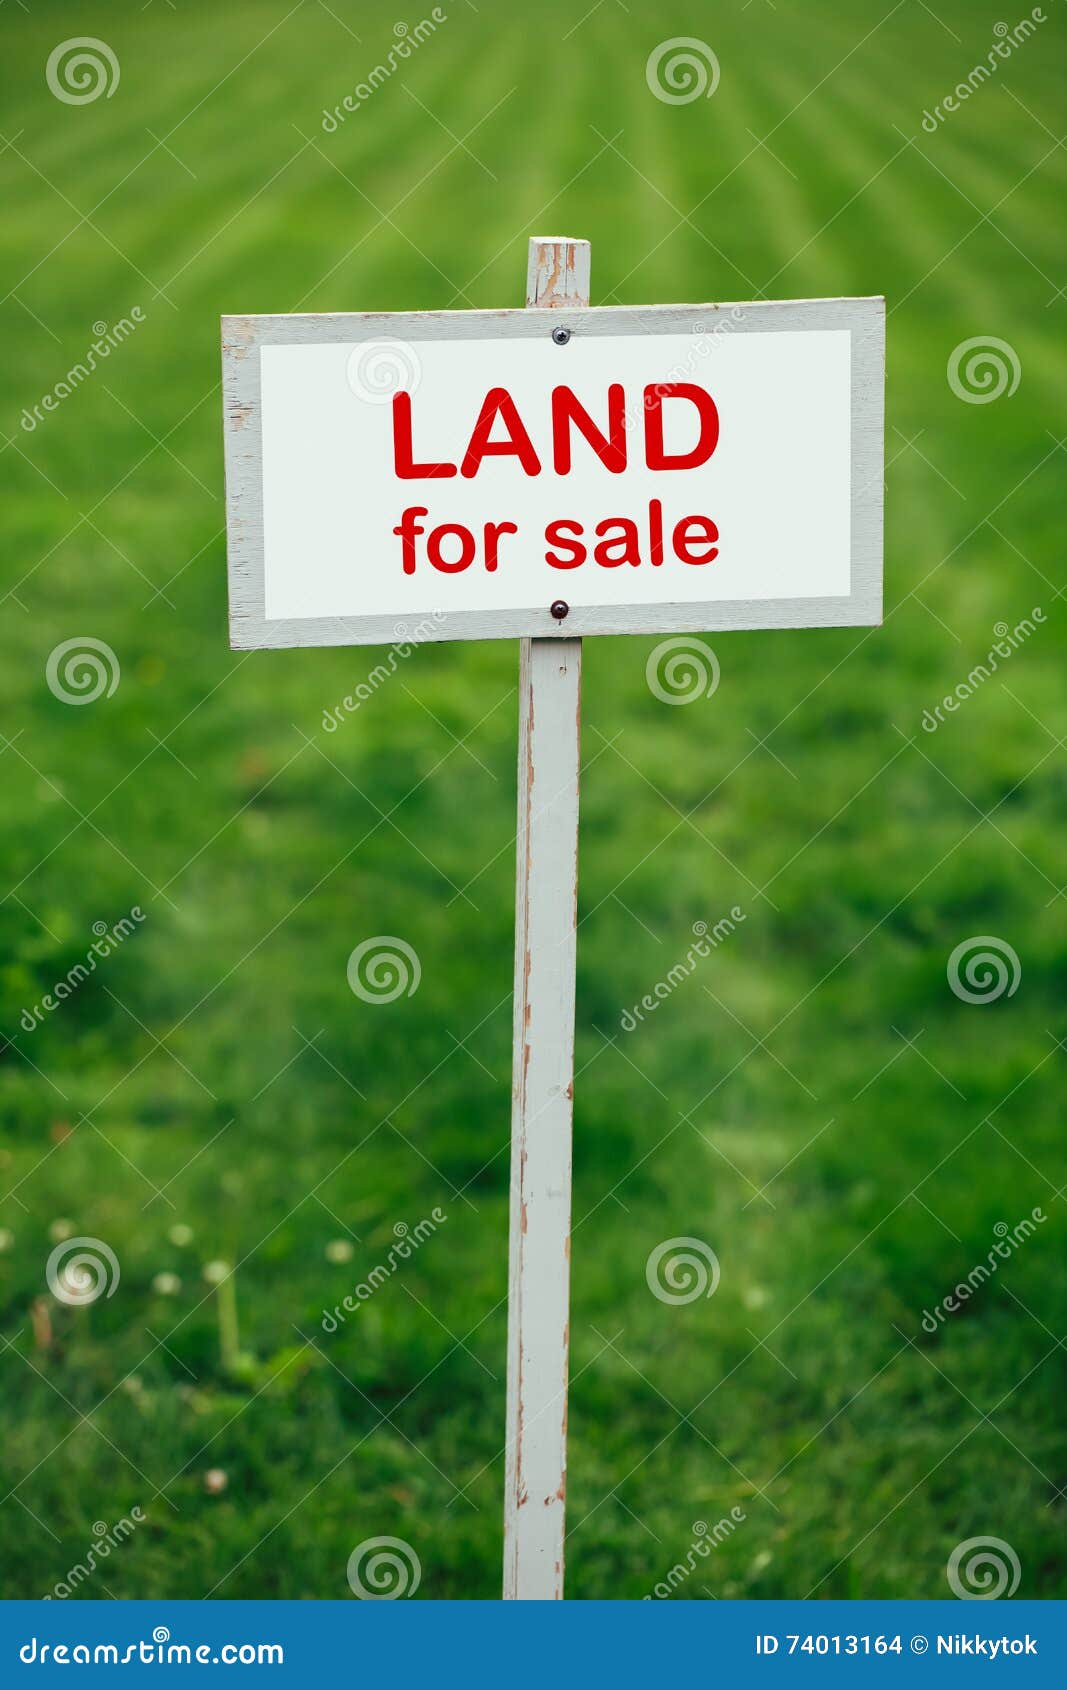 Farms for Sale, Ranches, Hunting Land for Sale - Land and Farm